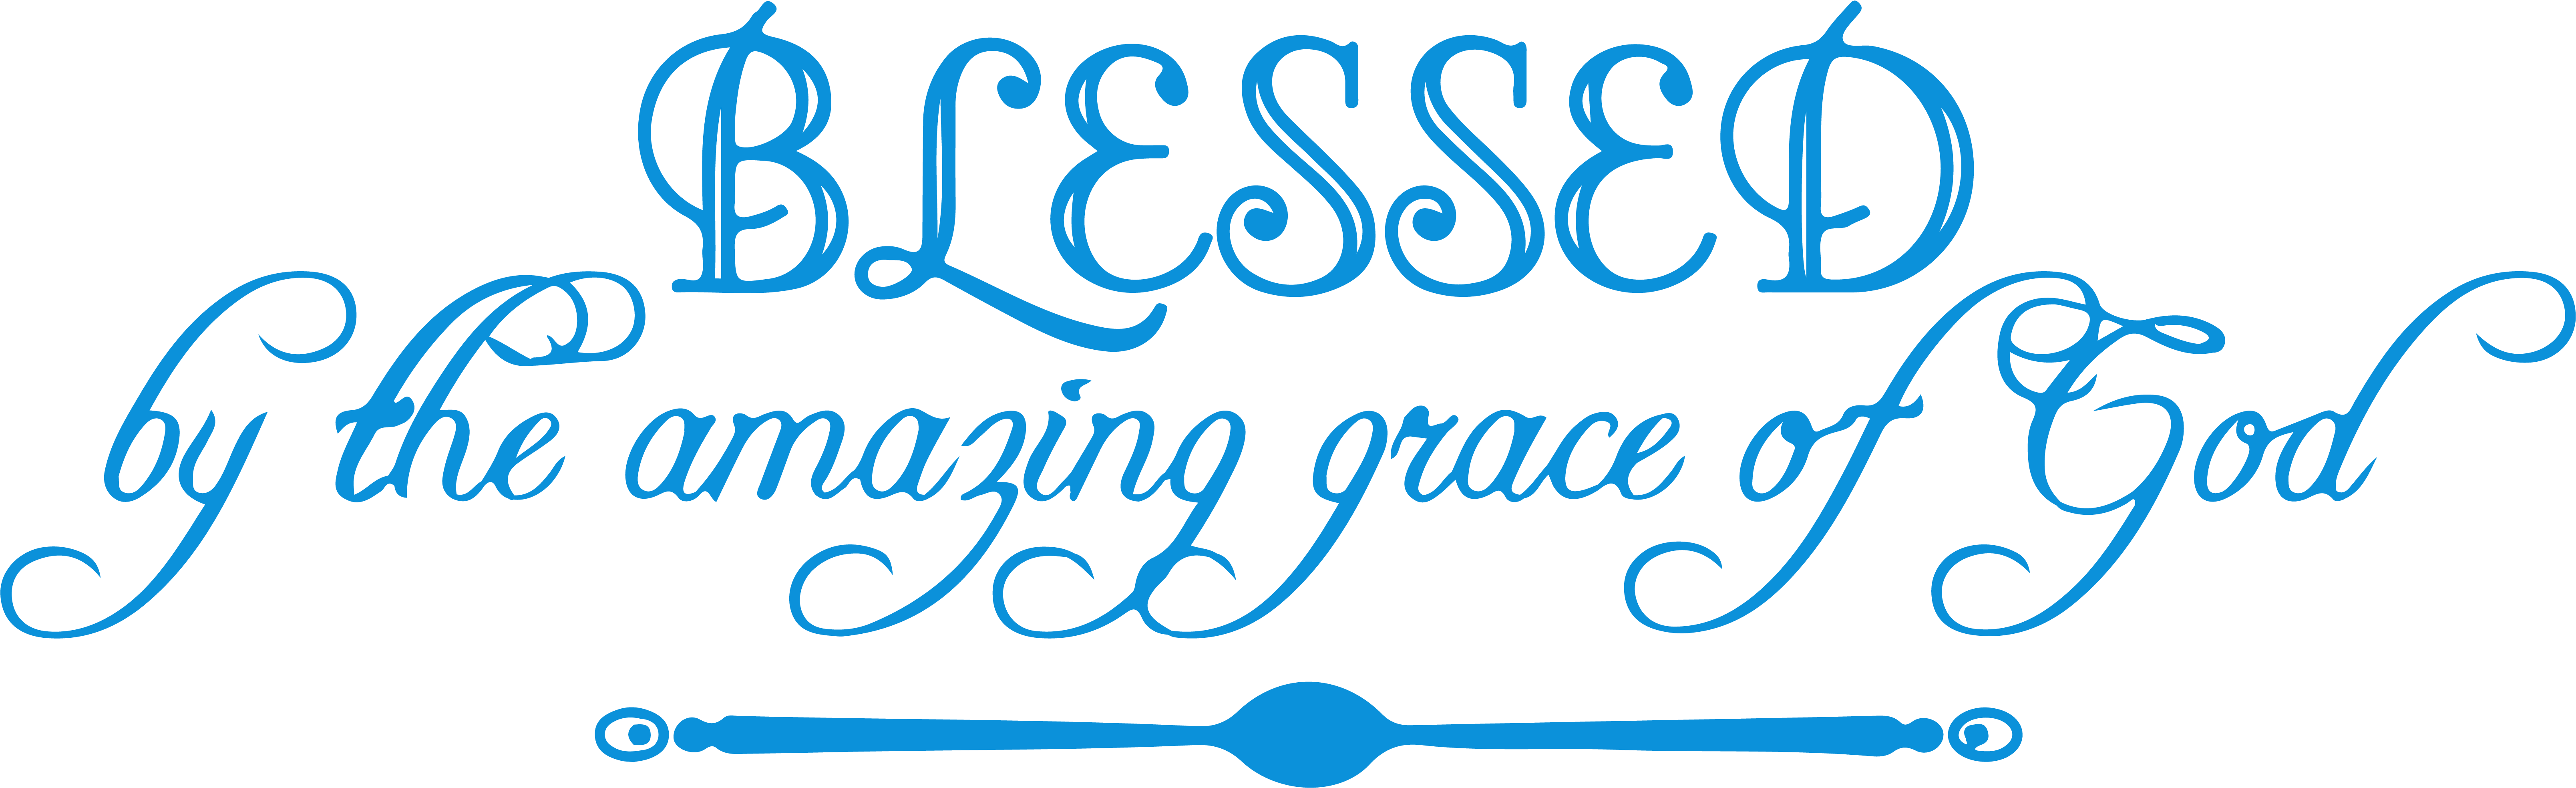 Blessed By The Amazing Grace Of God Vinyl Decal Sticker.